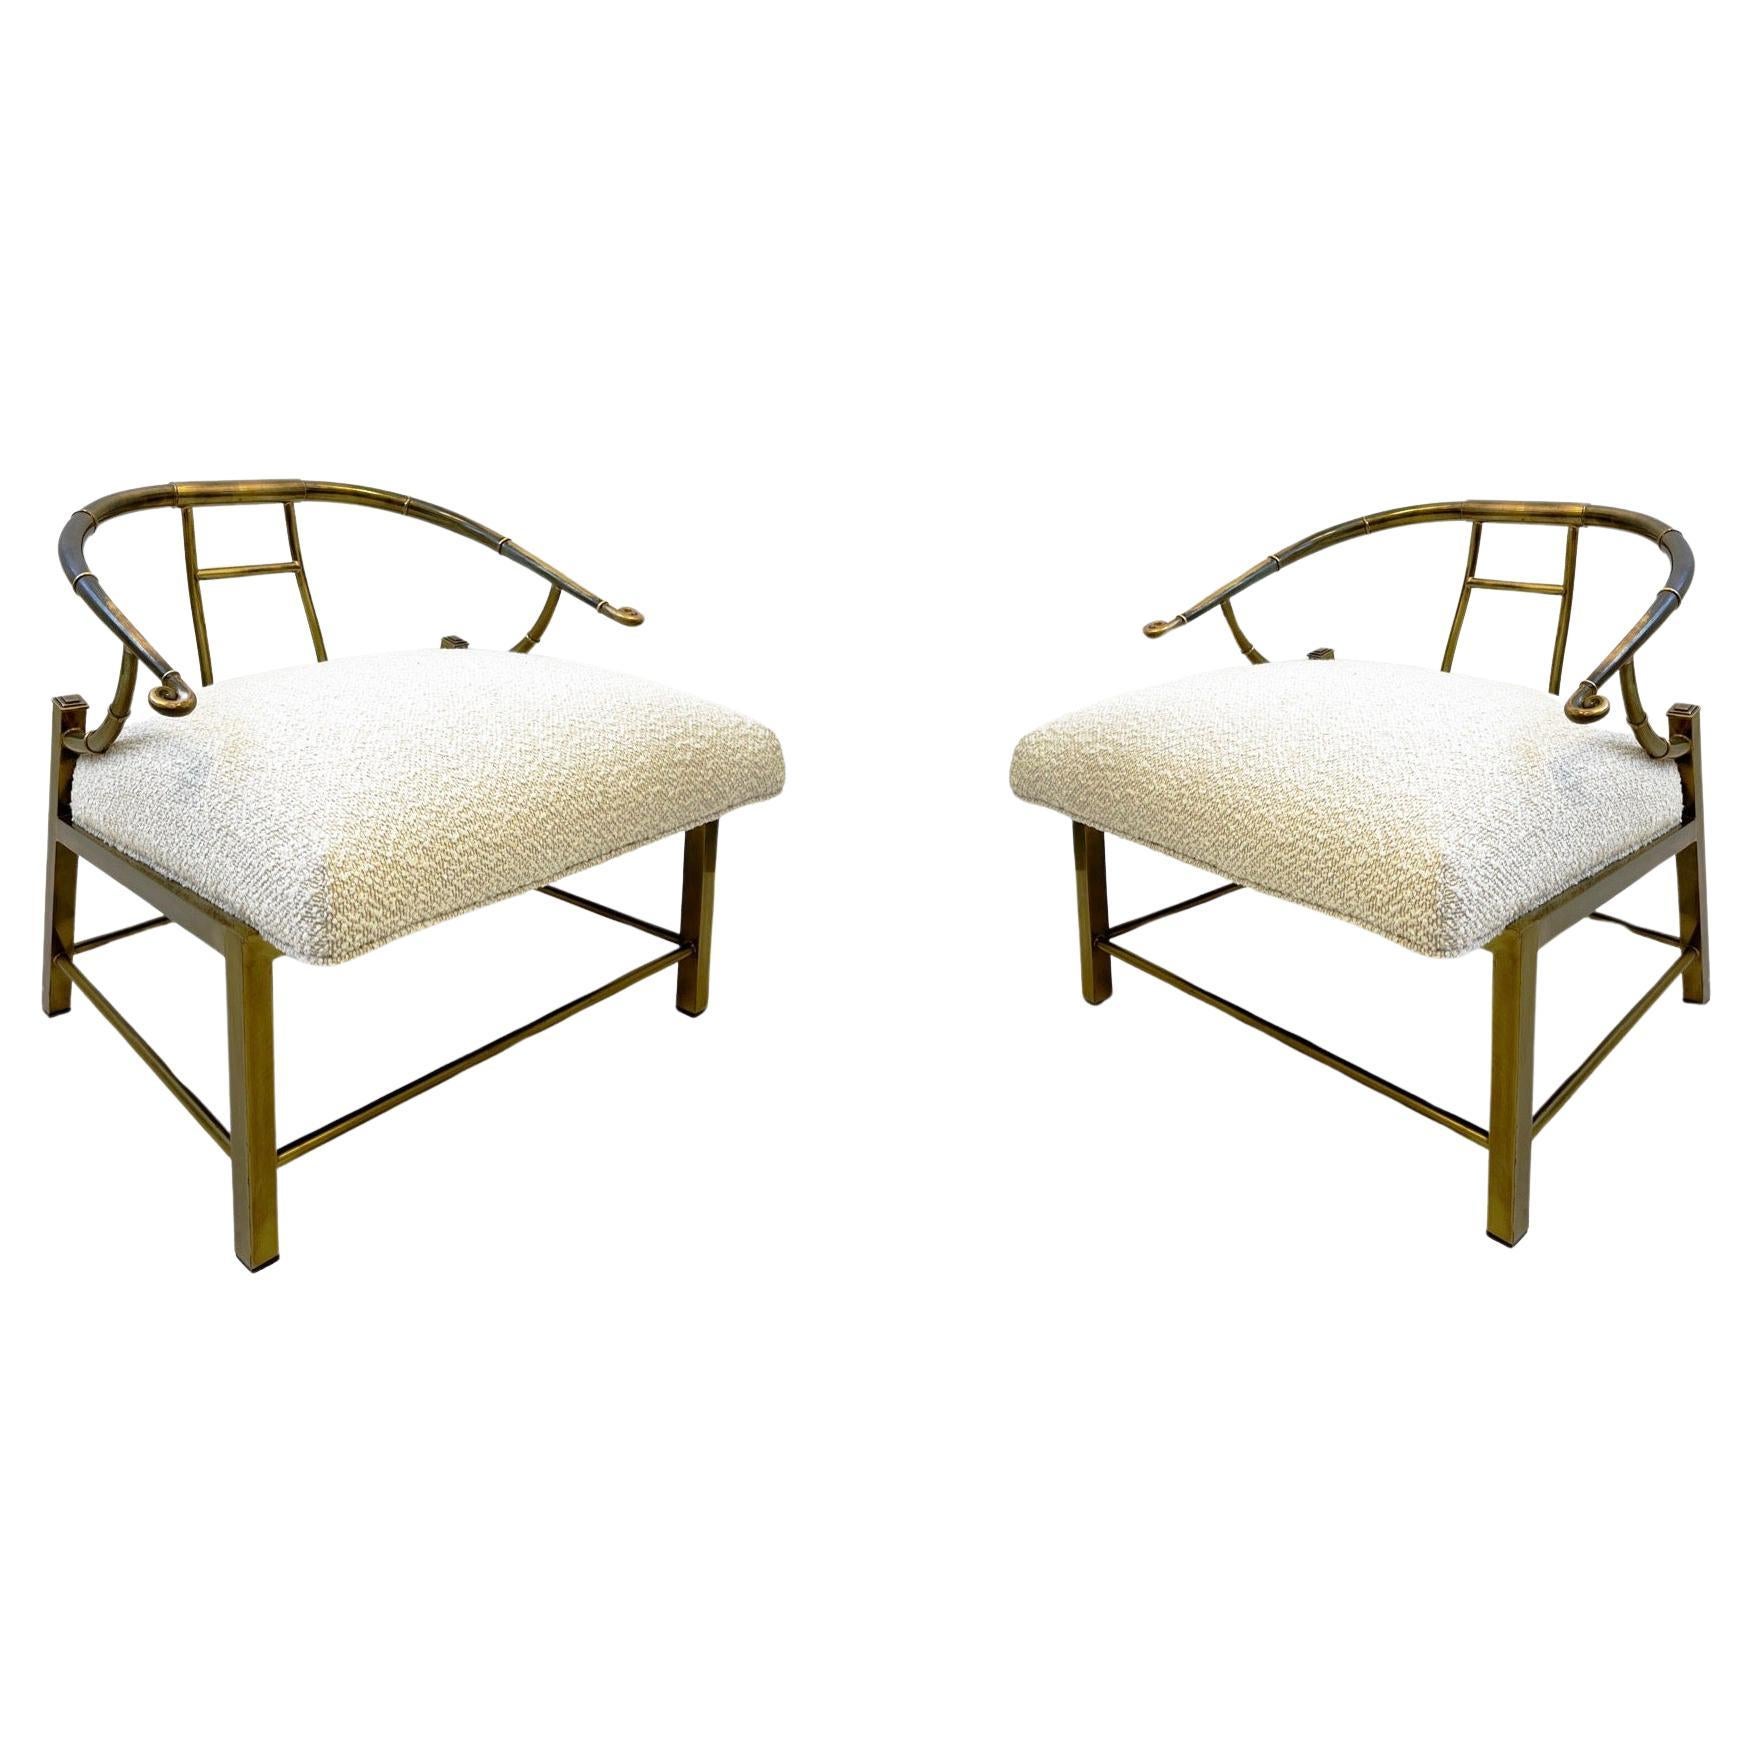 Pair of Aged Brass Lounge Chairs by Mastercraft